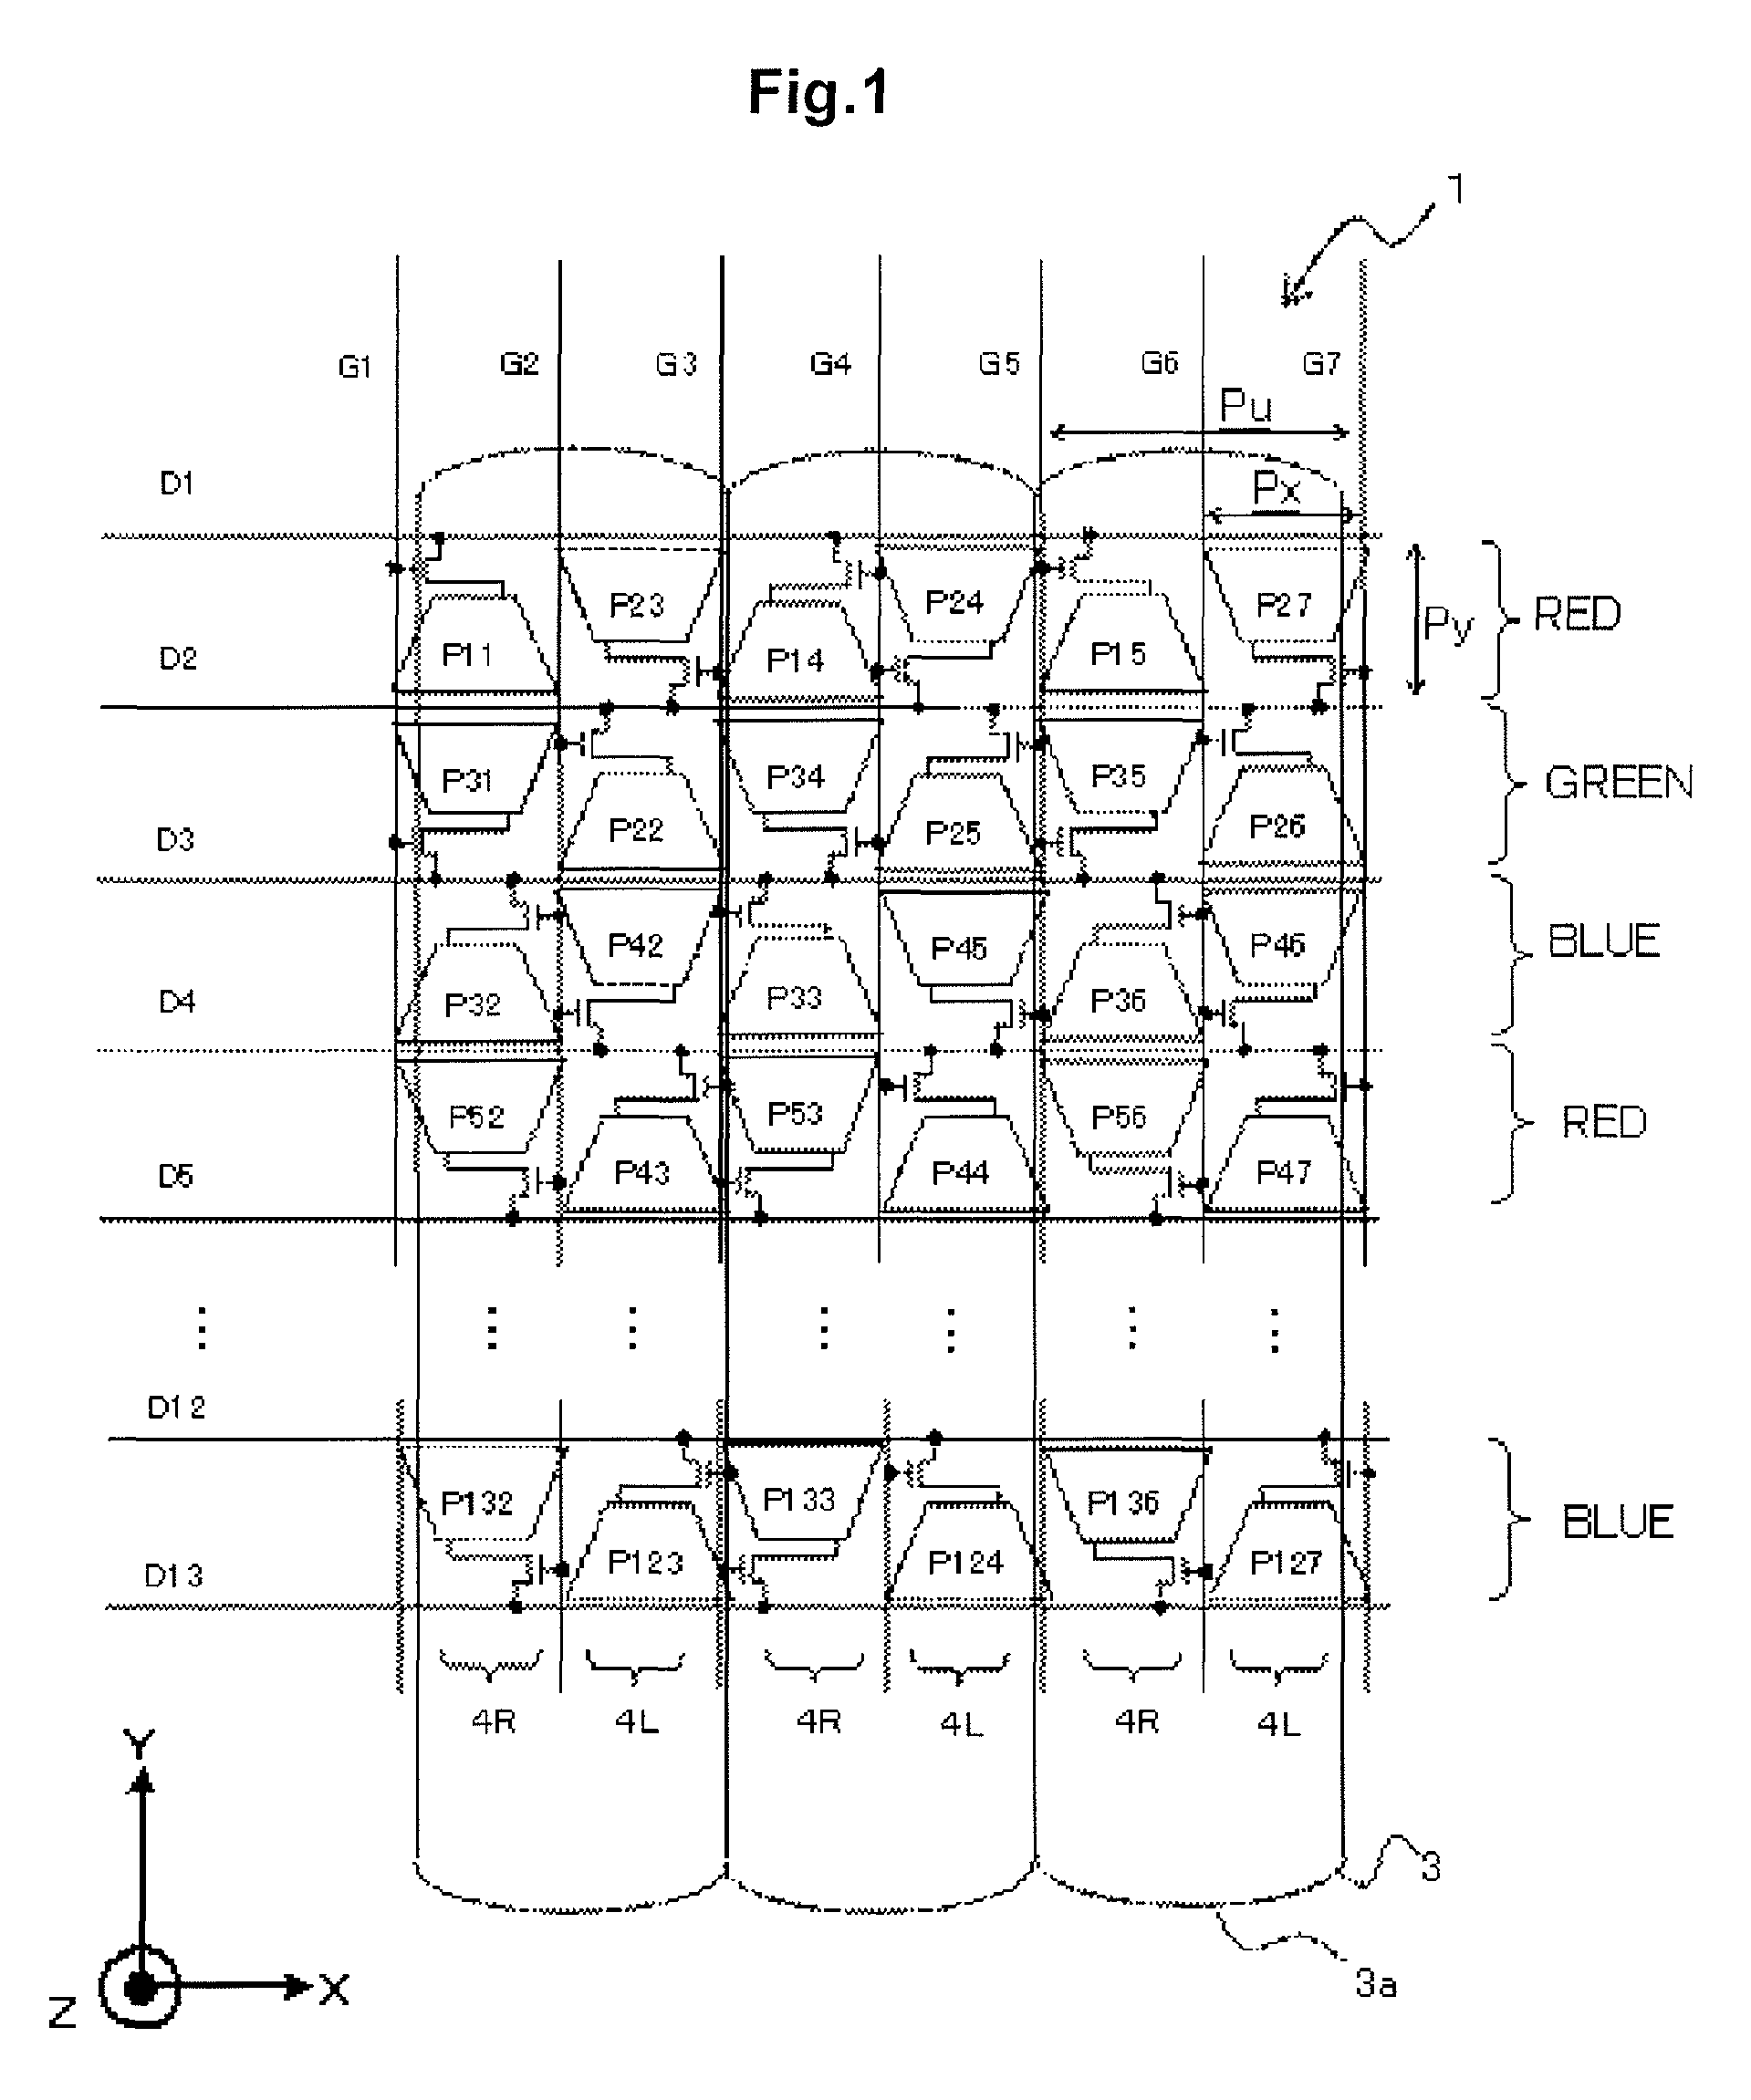 Image display device capable of displaying images in a plurality of view points for suppressing a problem originating from a light blocking portion arranged in a pixel aperture or a structural object and accomplishing a high aperture ratio